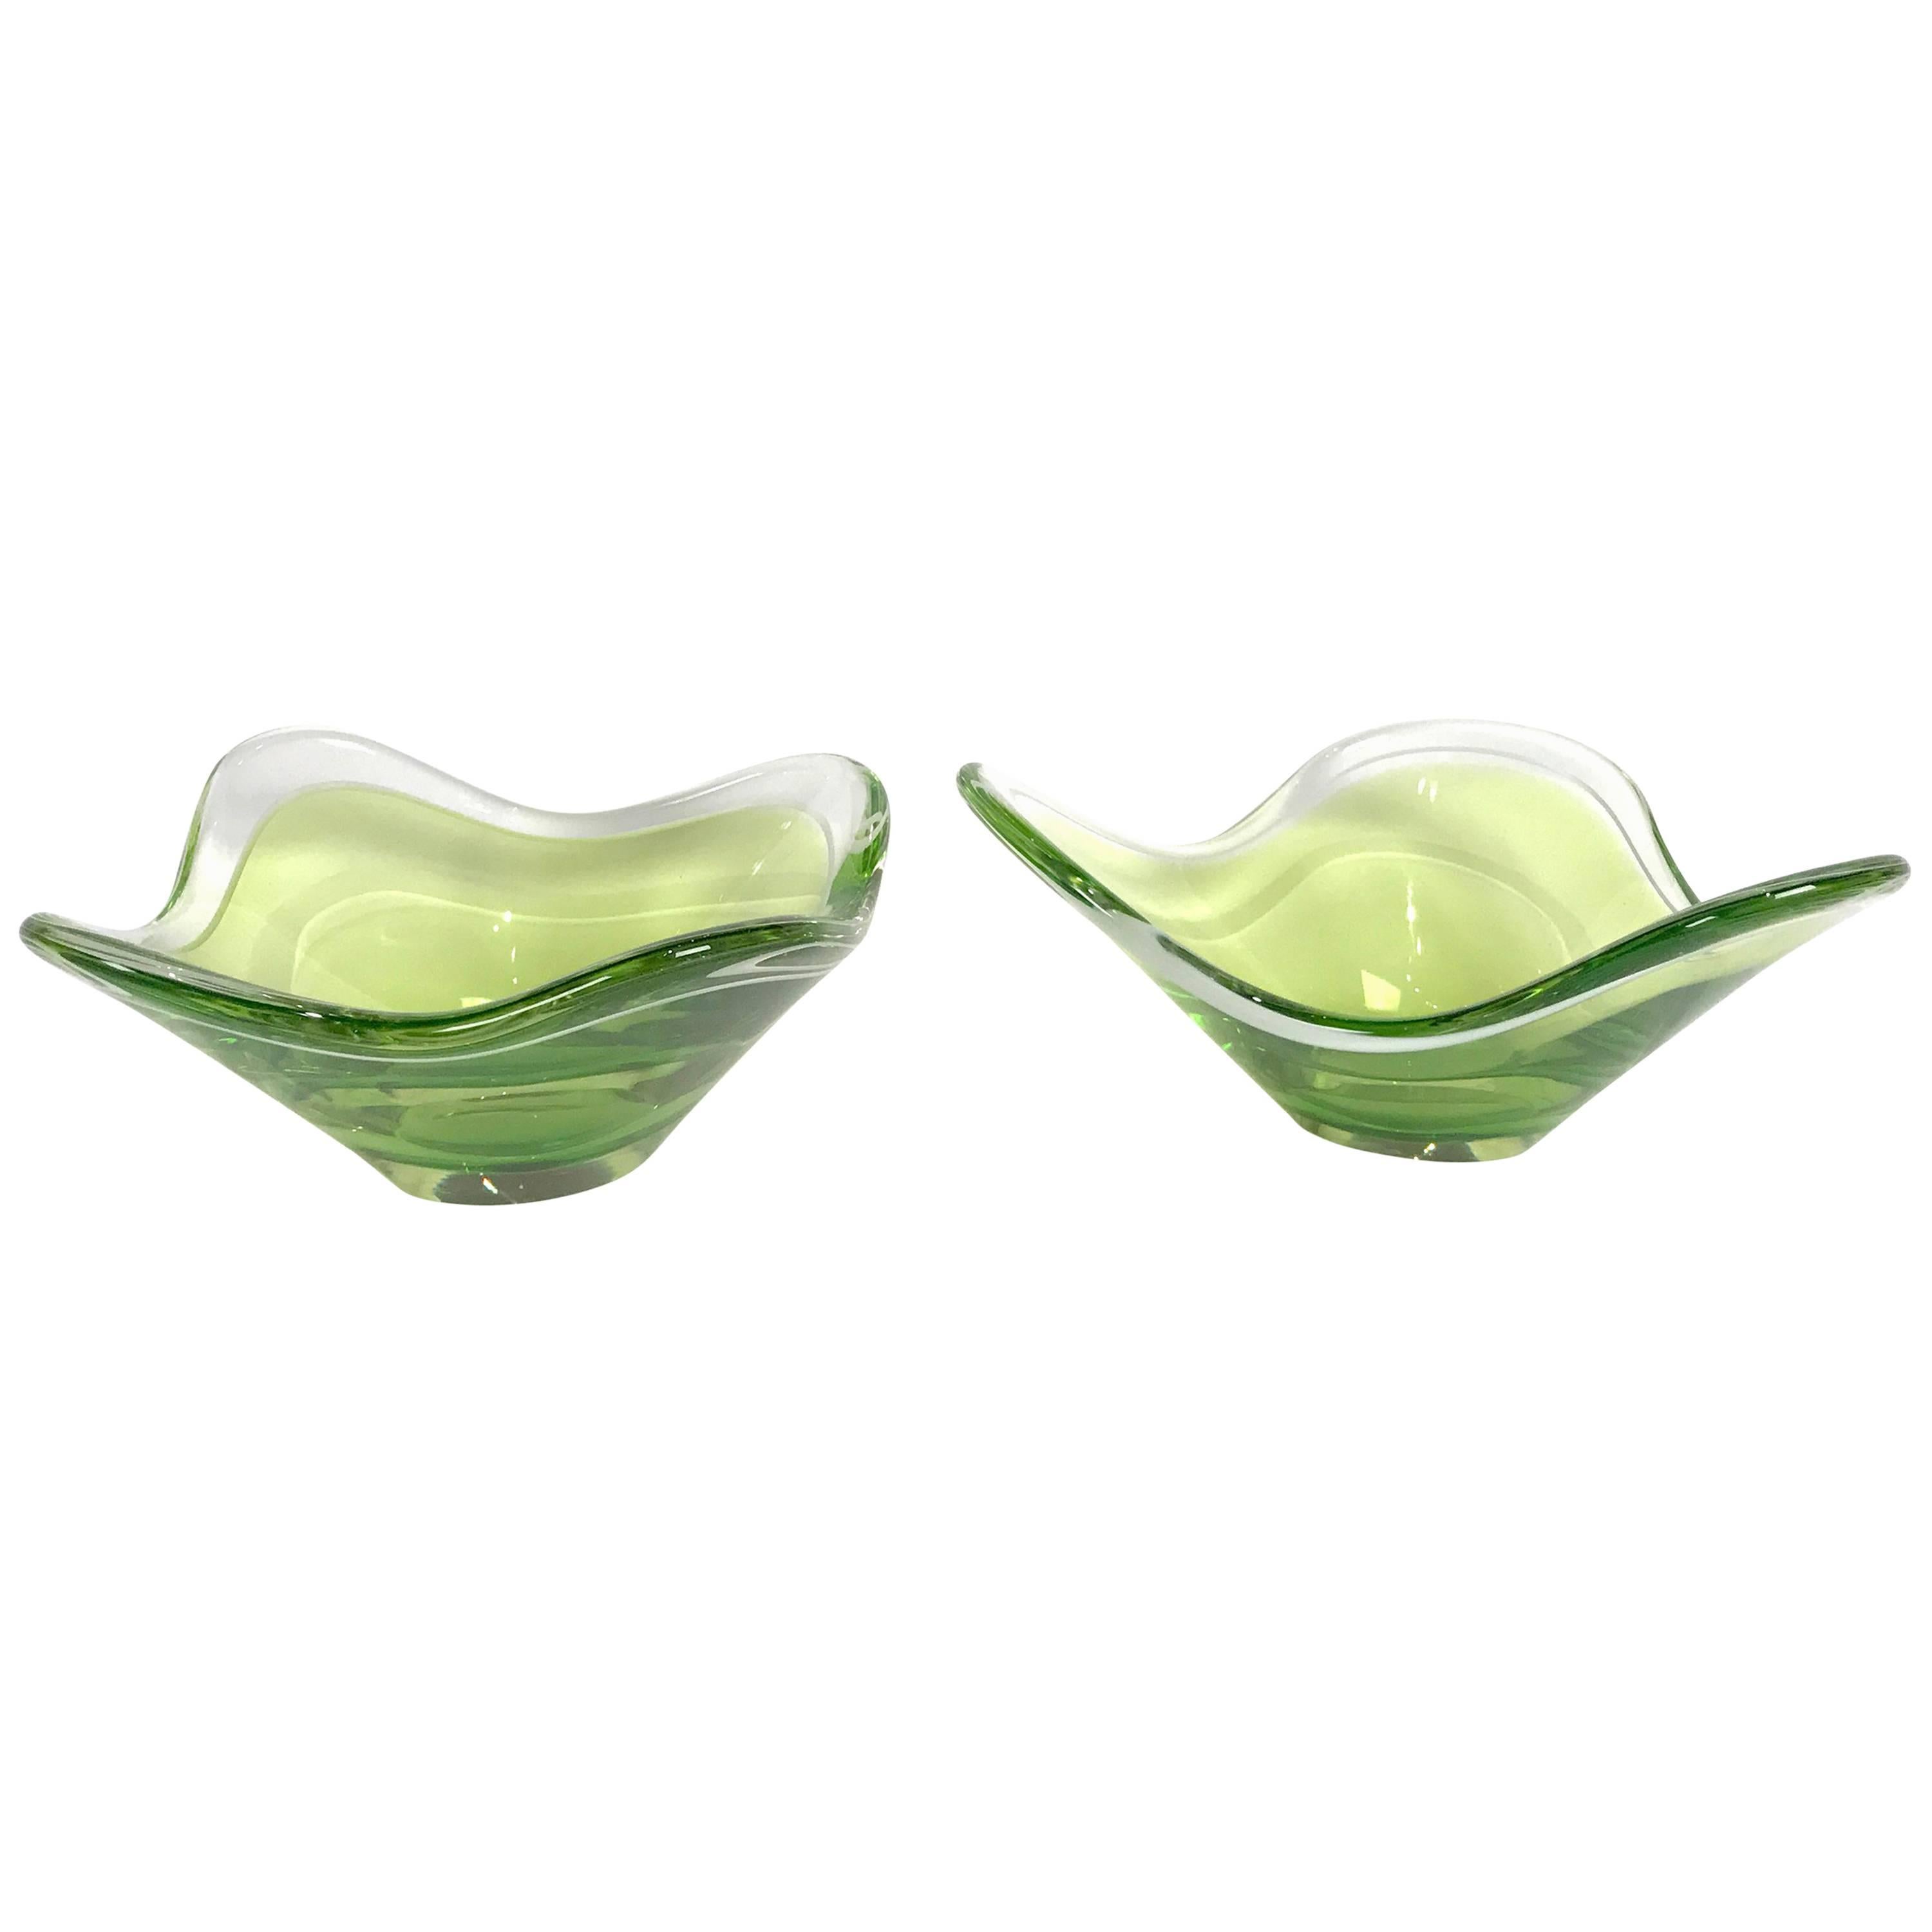 Two Matching Glass Bowls by Paul Kedelv for Flygsfors, 1955 For Sale